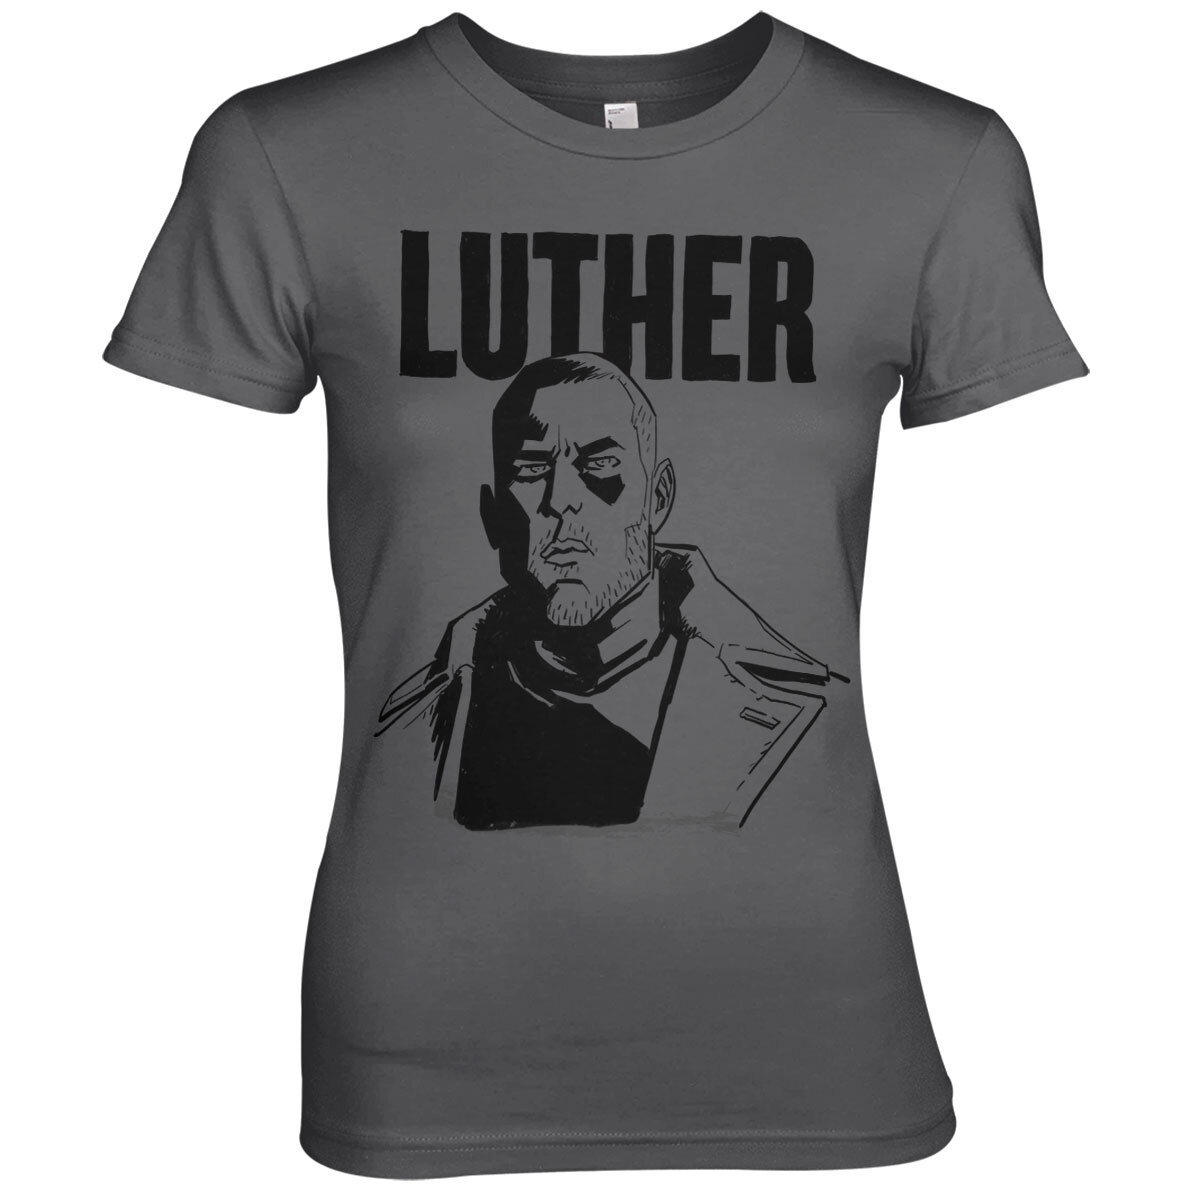 The Umbrella Academy - Luther Girly Tee